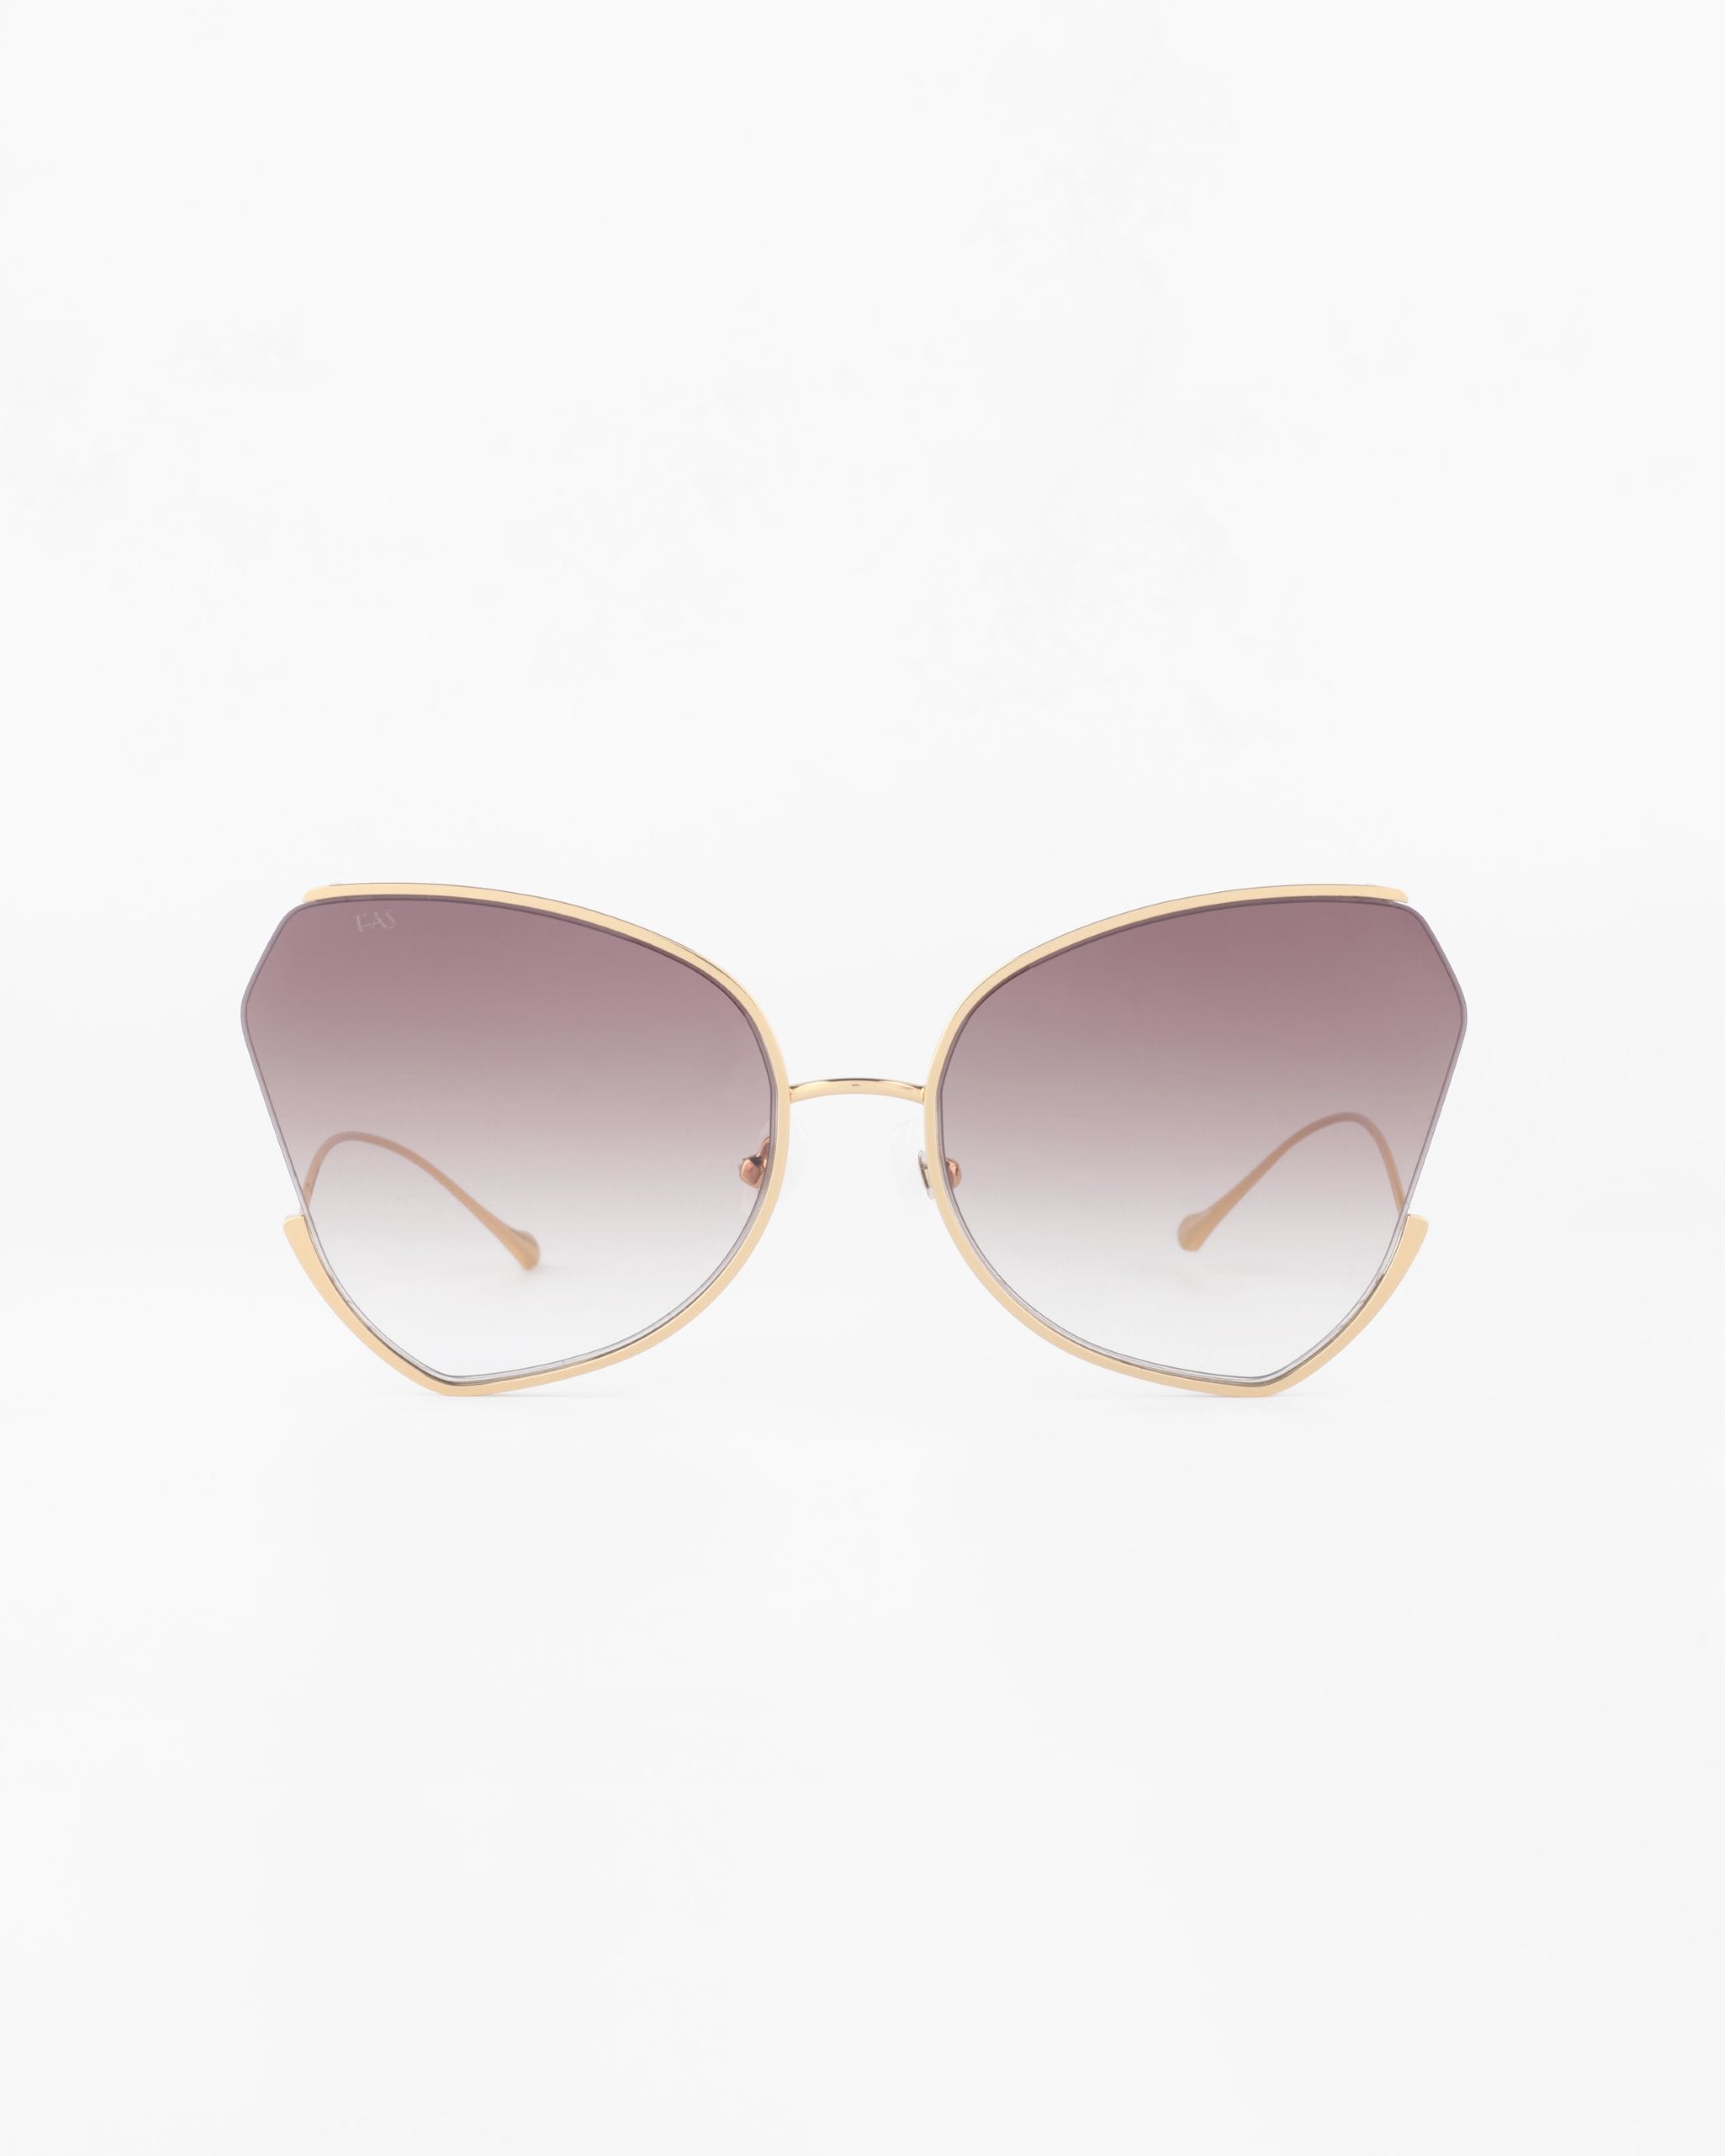 A pair of fashionable Watercolour sunglasses by For Art&#39;s Sake® with large, ombré lenses and thin, gold-plated stainless steel frames. The subtle cat-eye shape adds a stylish and retro flair to the design, while the butterfly silhouette brings an extra touch of elegance against a plain white background.